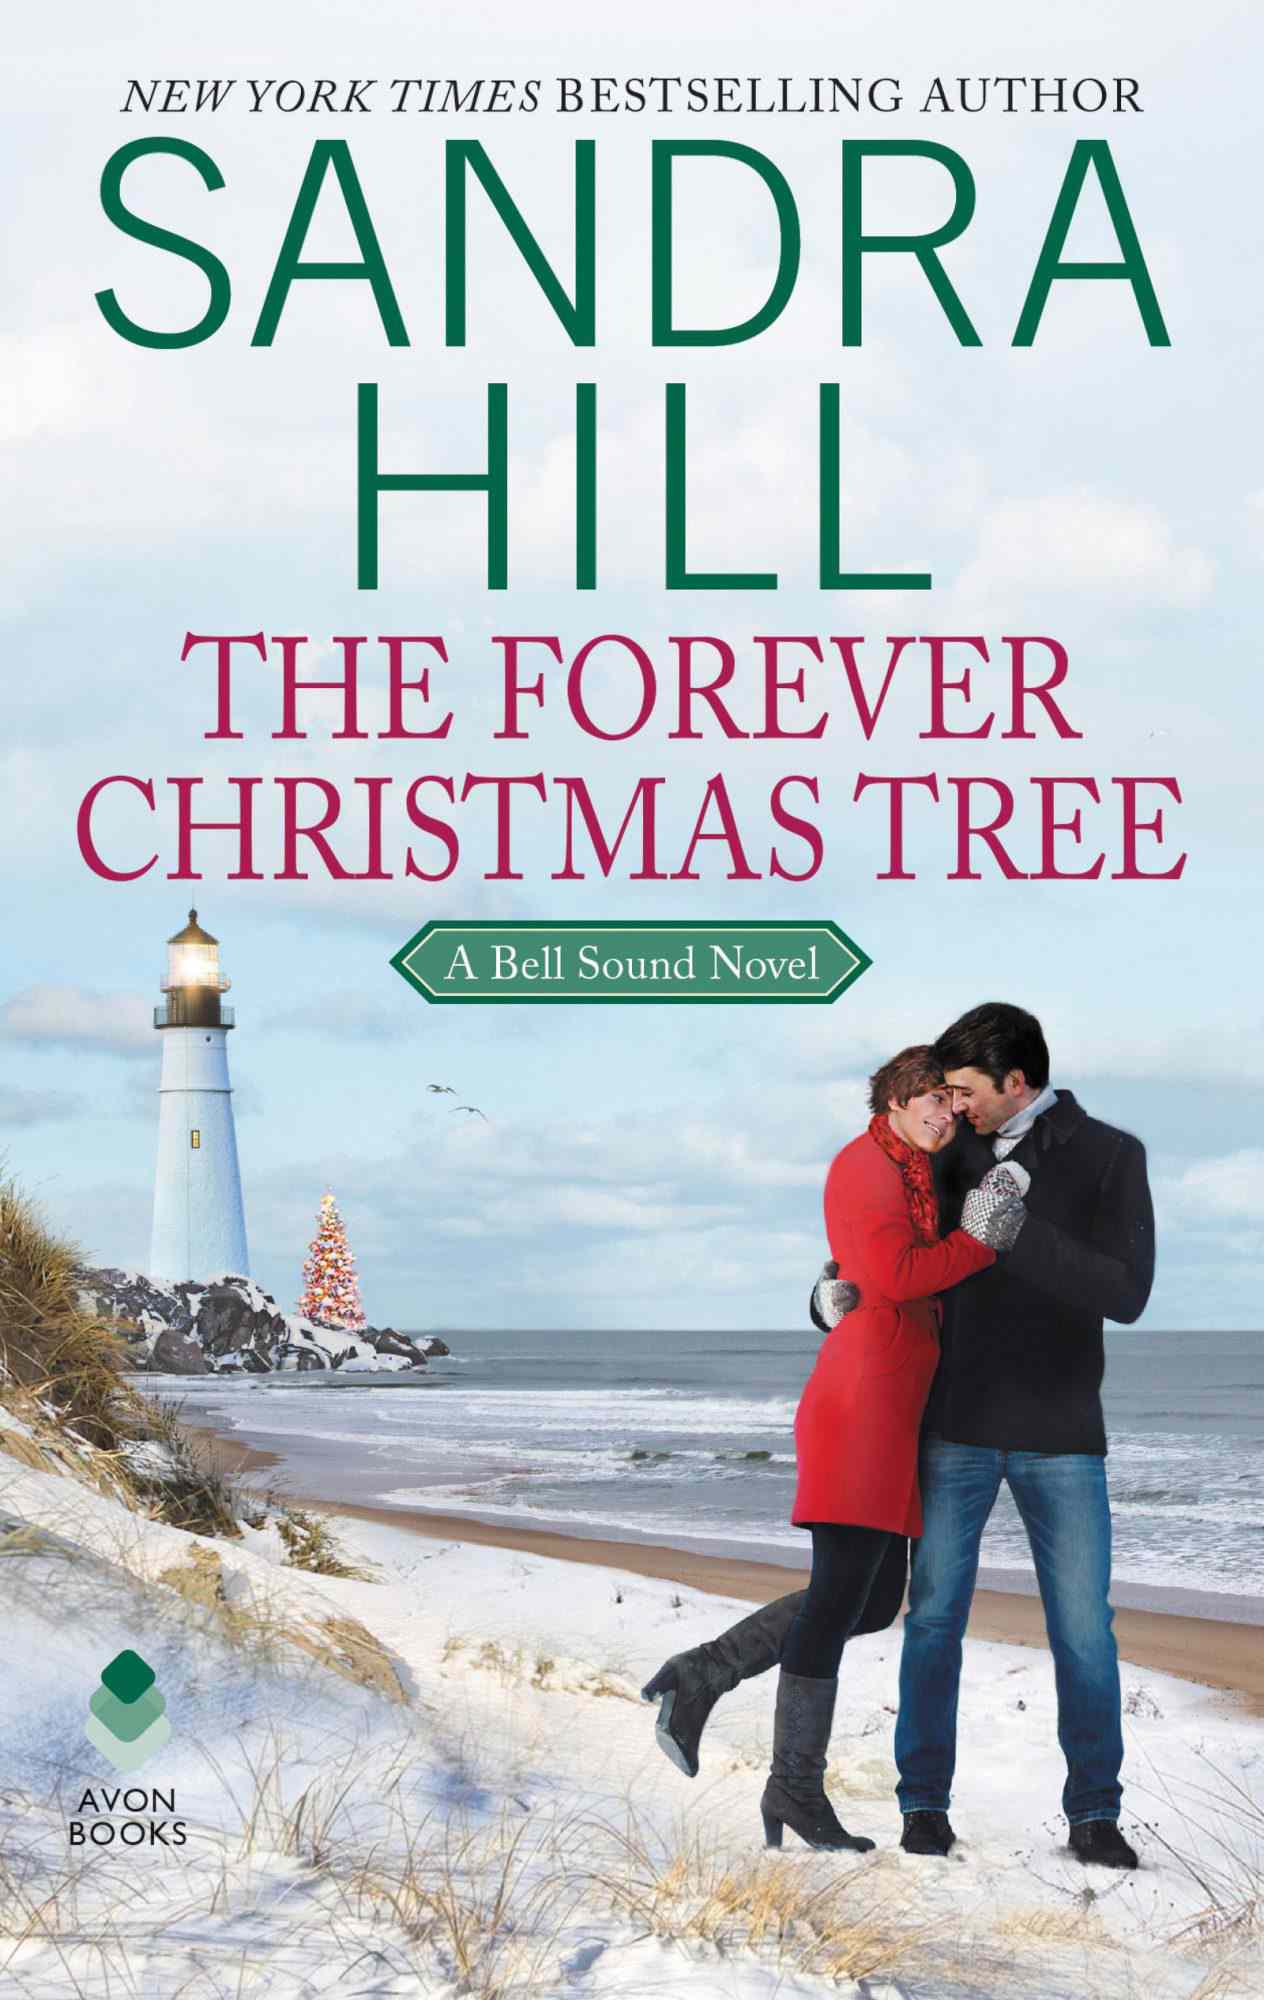 The Forever Christmas Tree&nbsp;by Sandra Hill